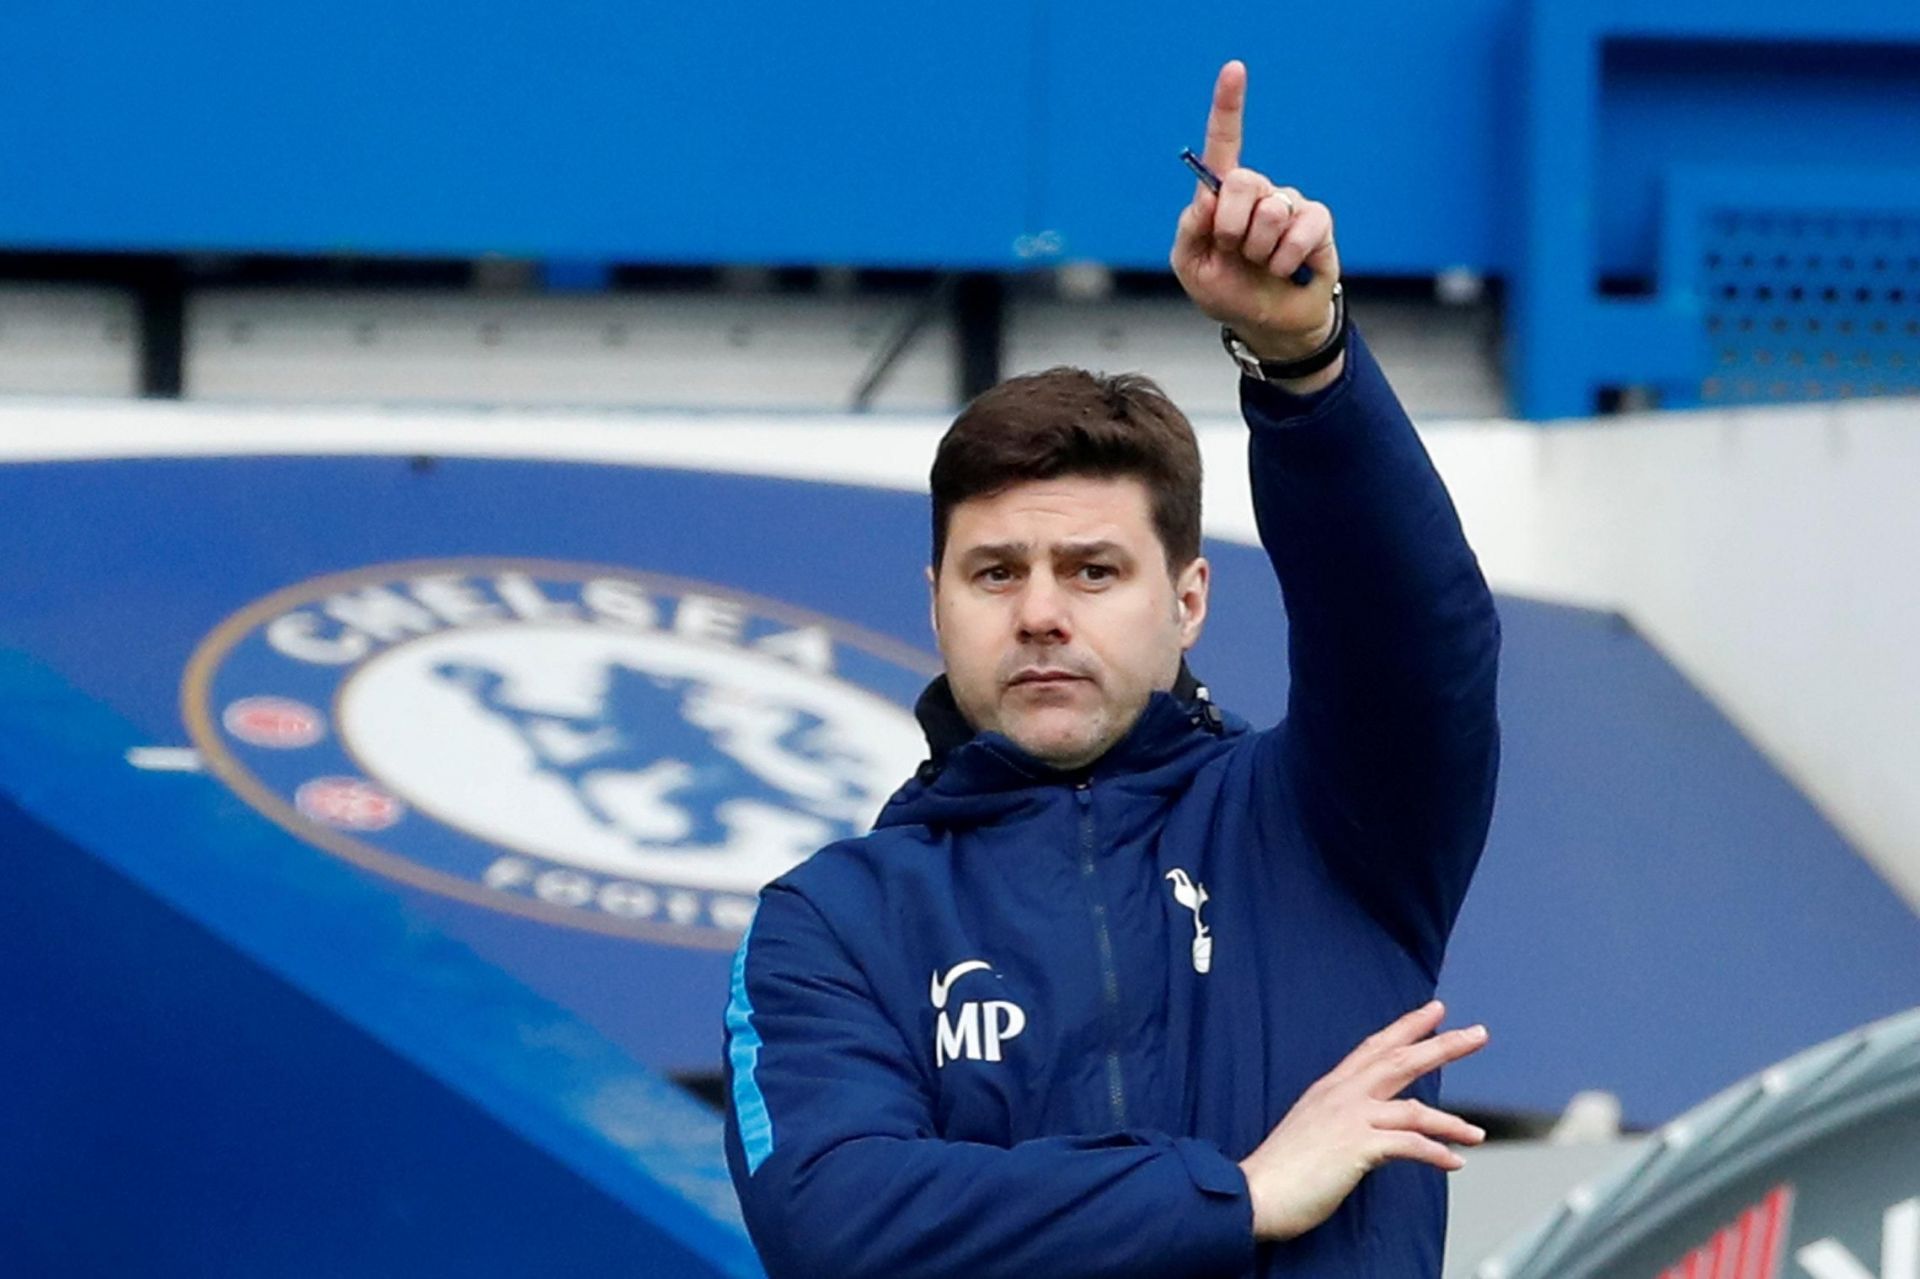 Pochettino has been a welcome sight at Chelsea after dismal season